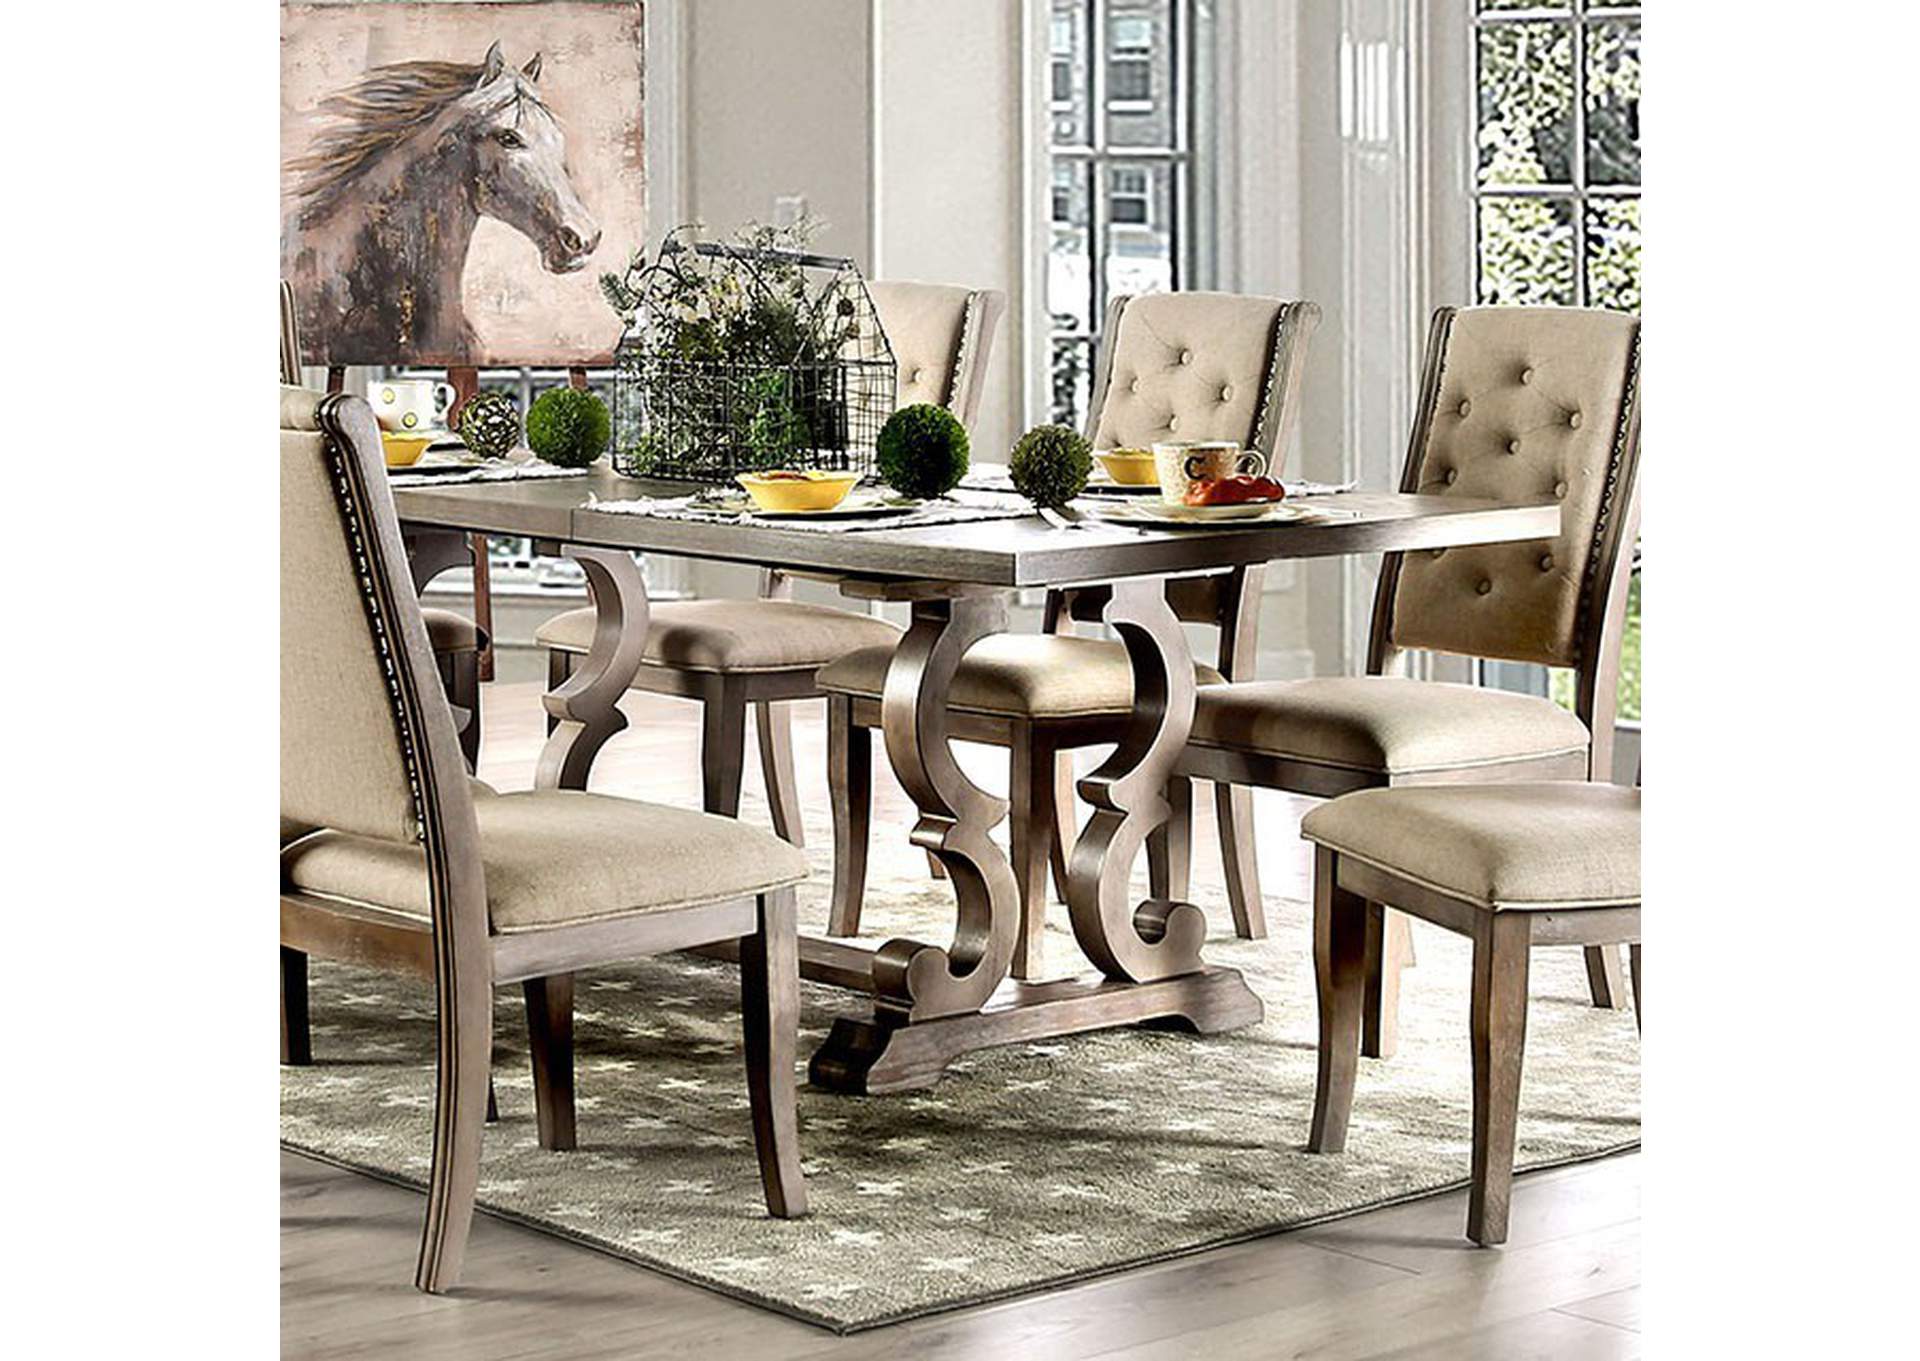 Patience Rustic Natural Tone Dining Table,Furniture of America